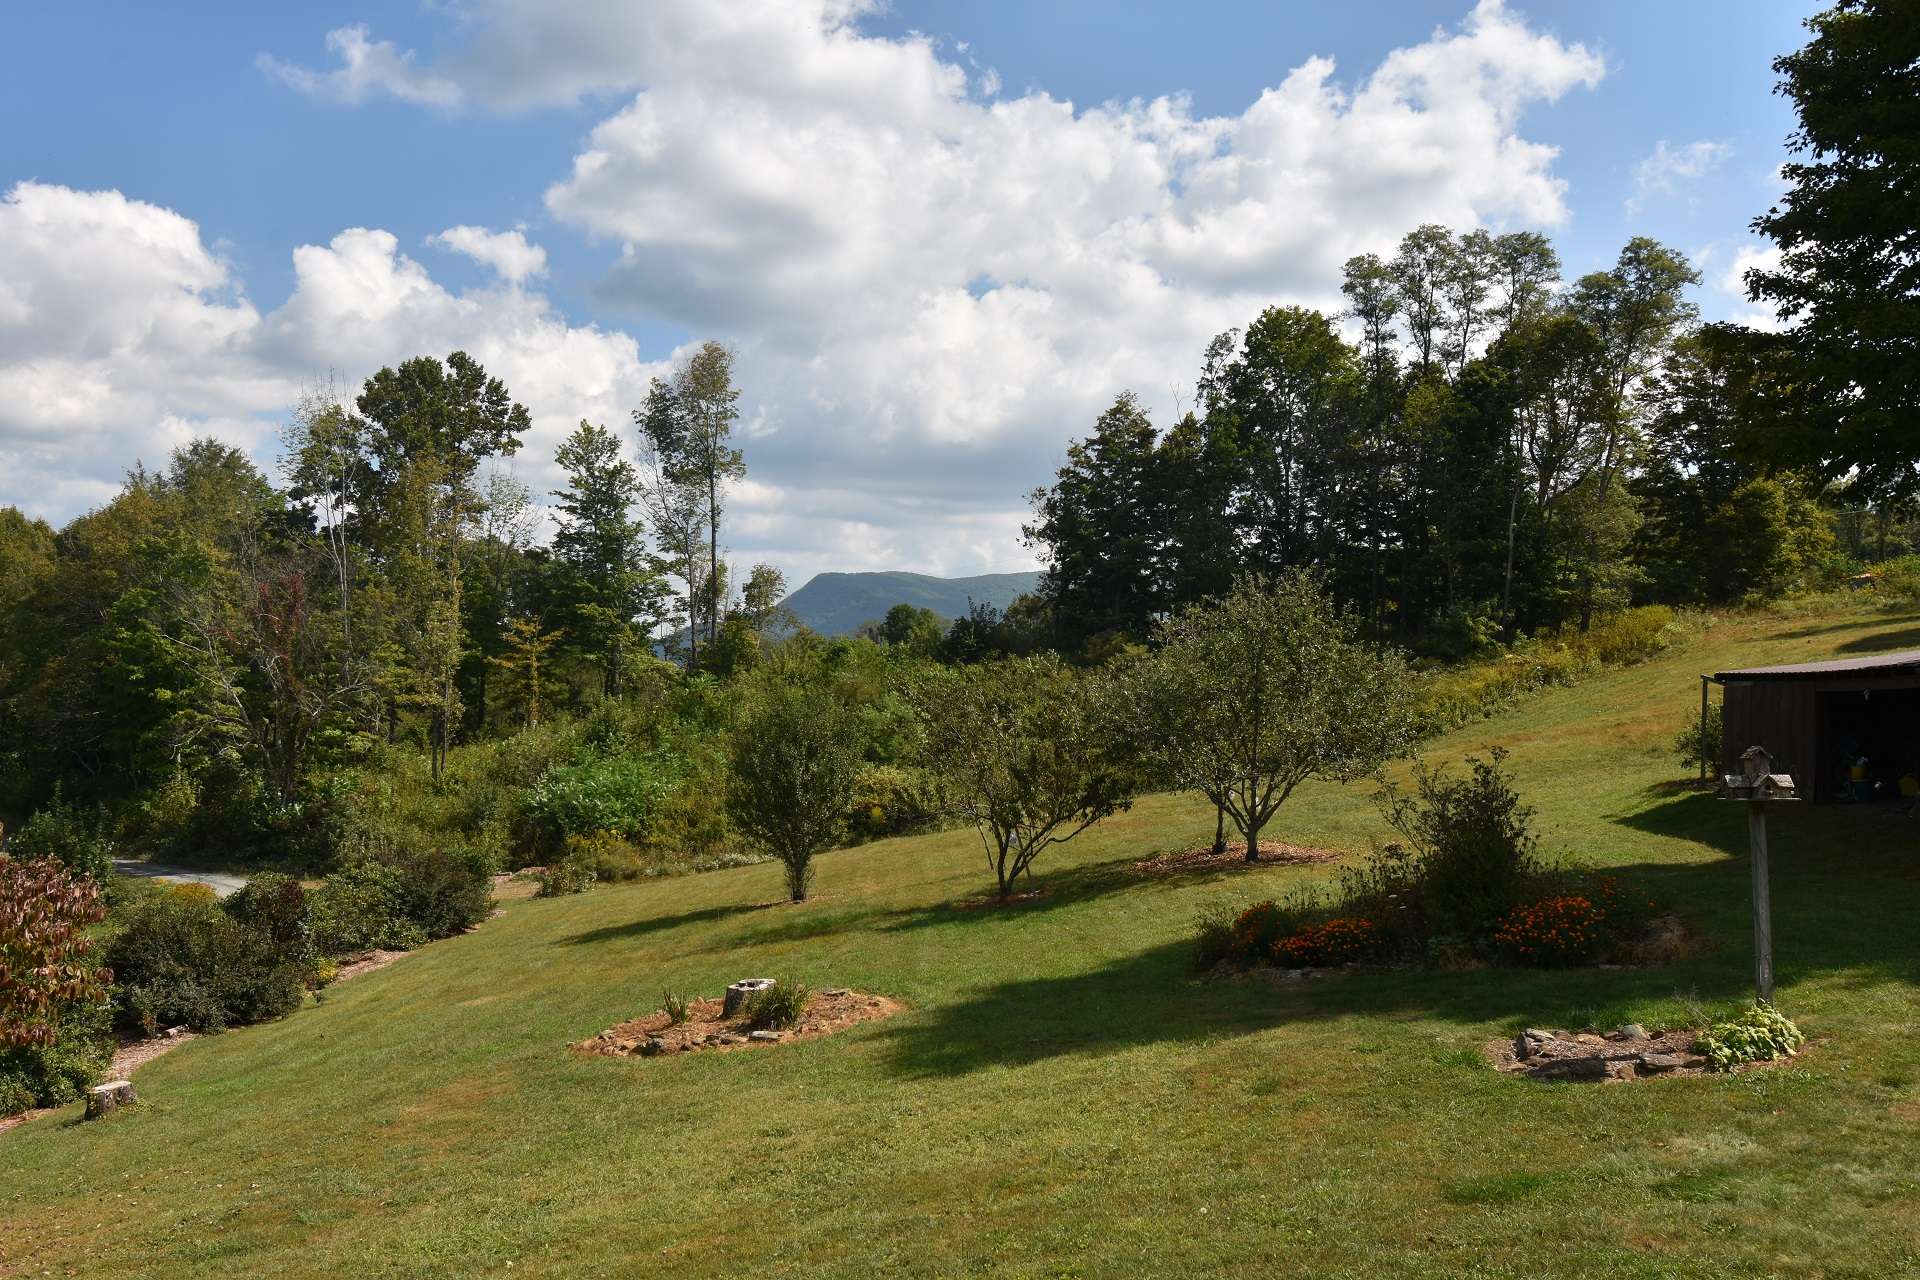 With a mixture of pasture and woodlands, this property is perfect for a mini farm or hunting property.